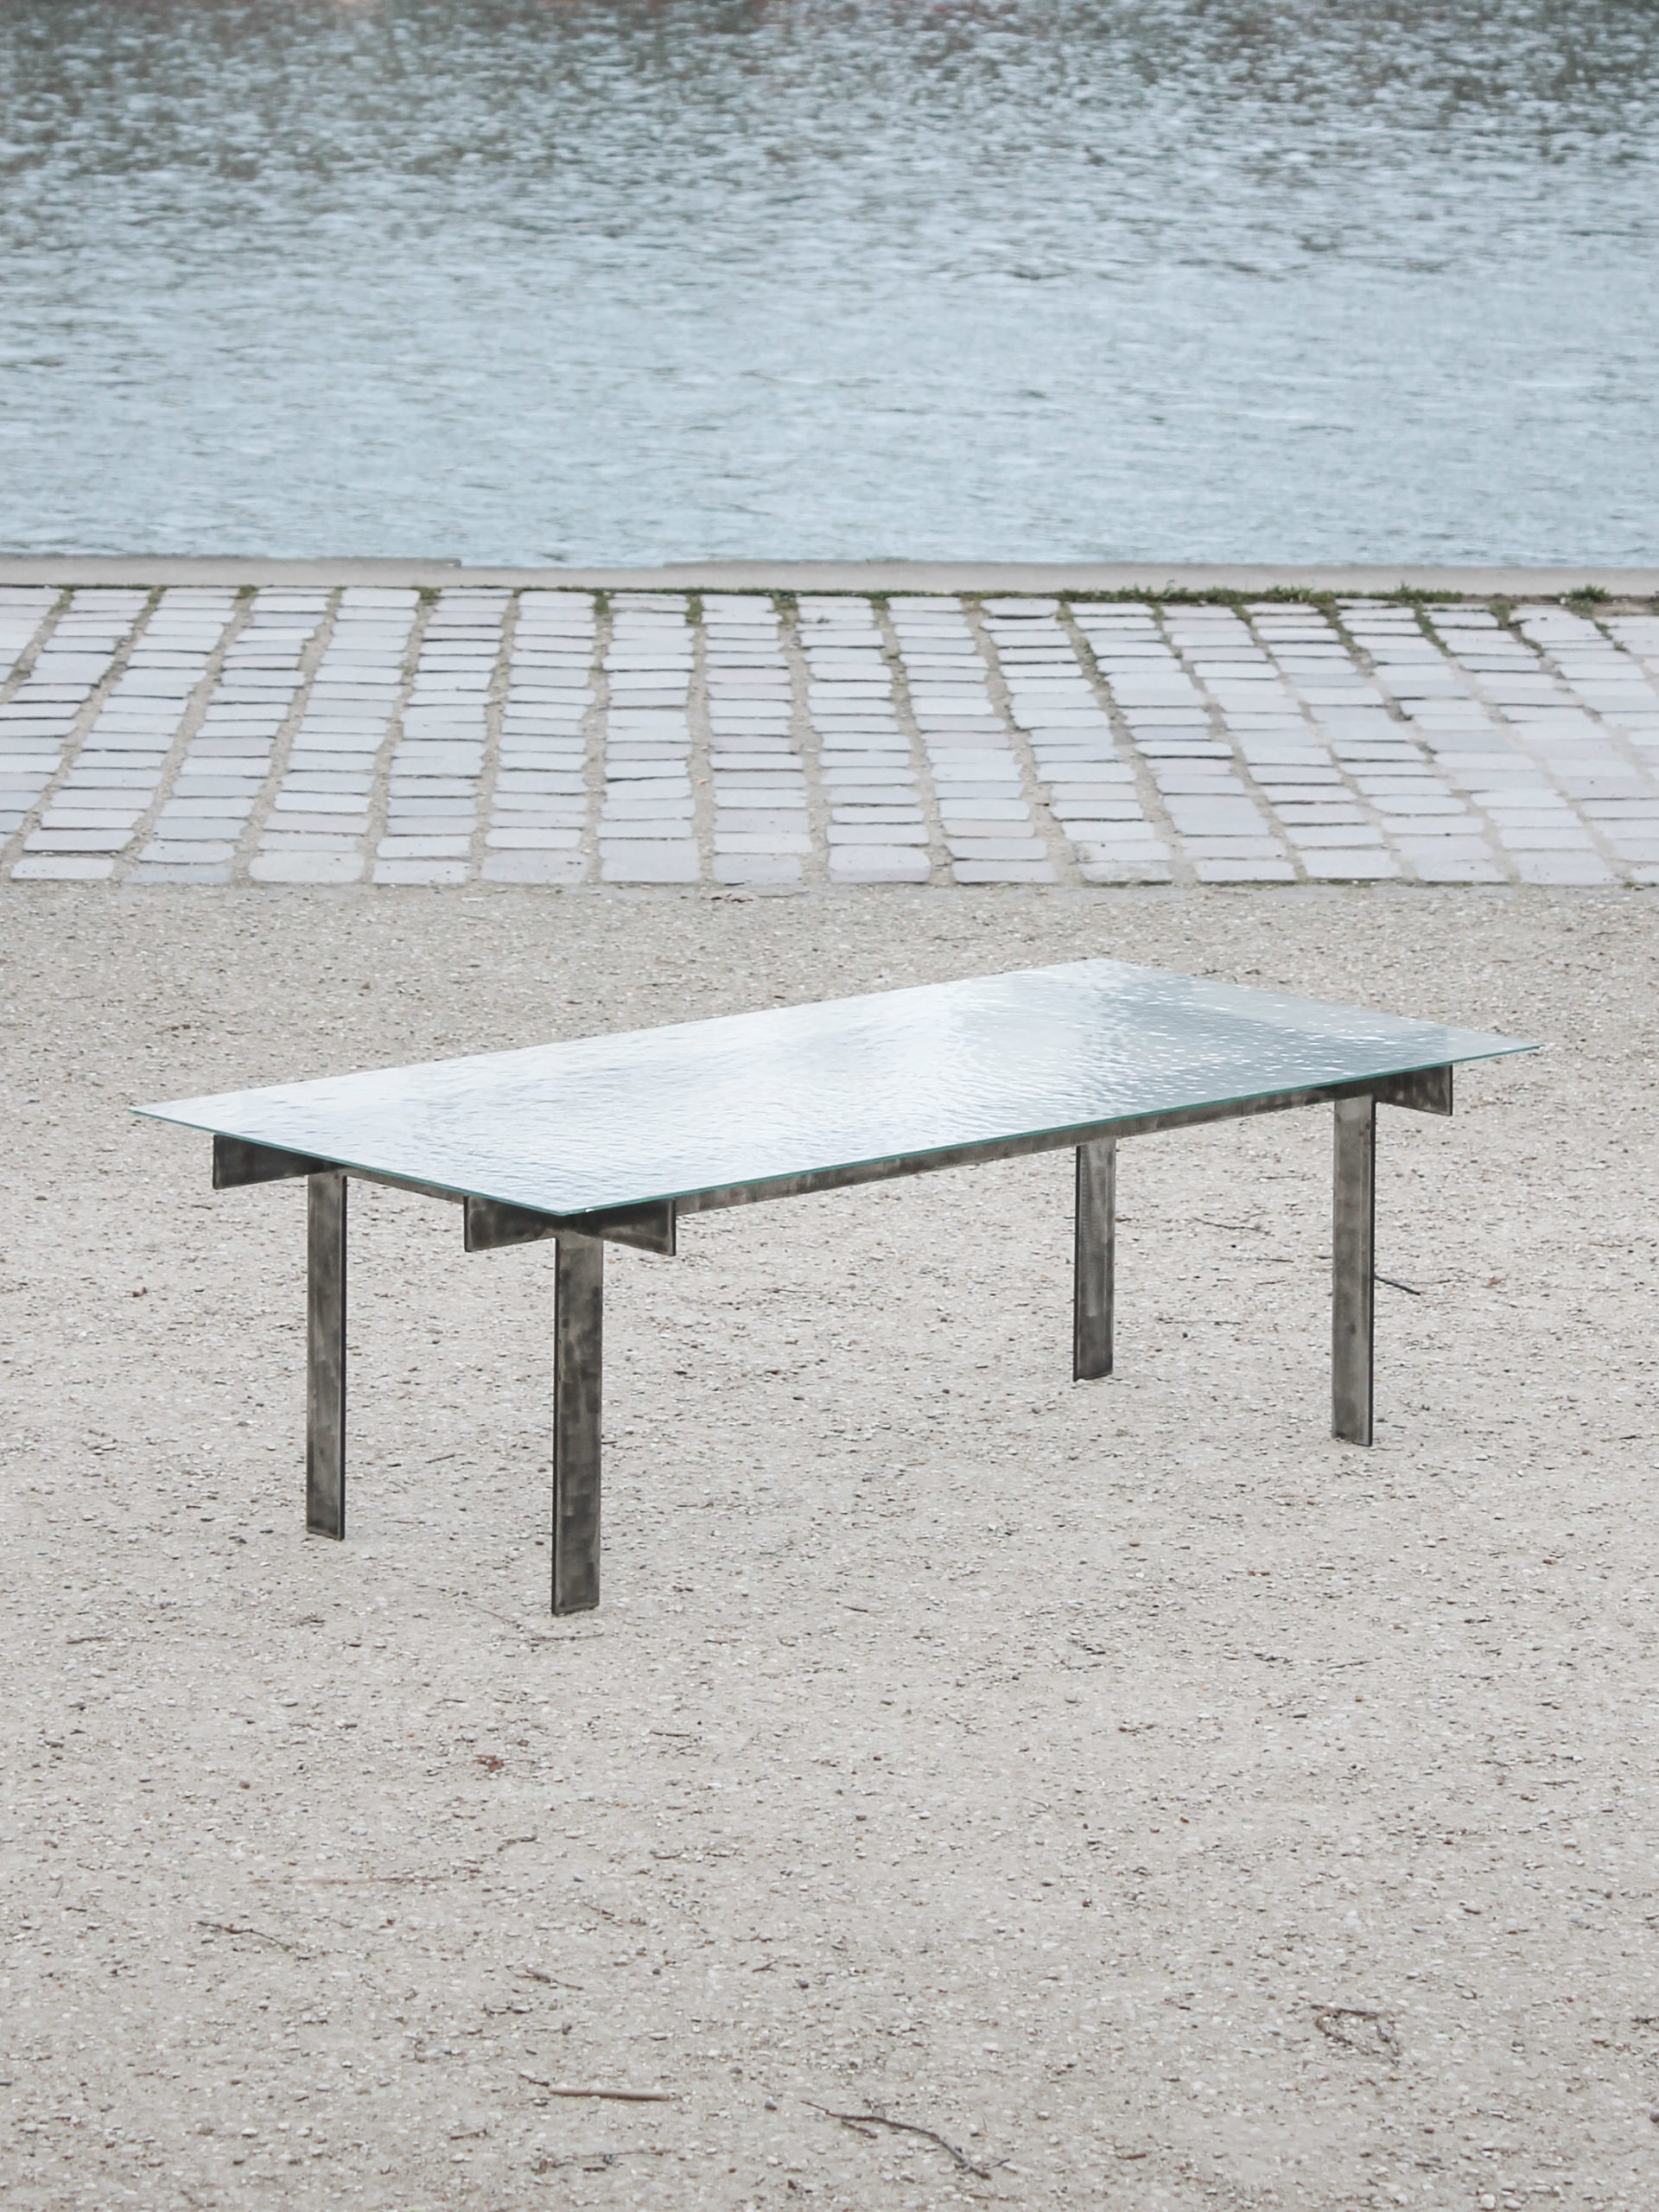 D01 : Removable steel table made from unused scraps